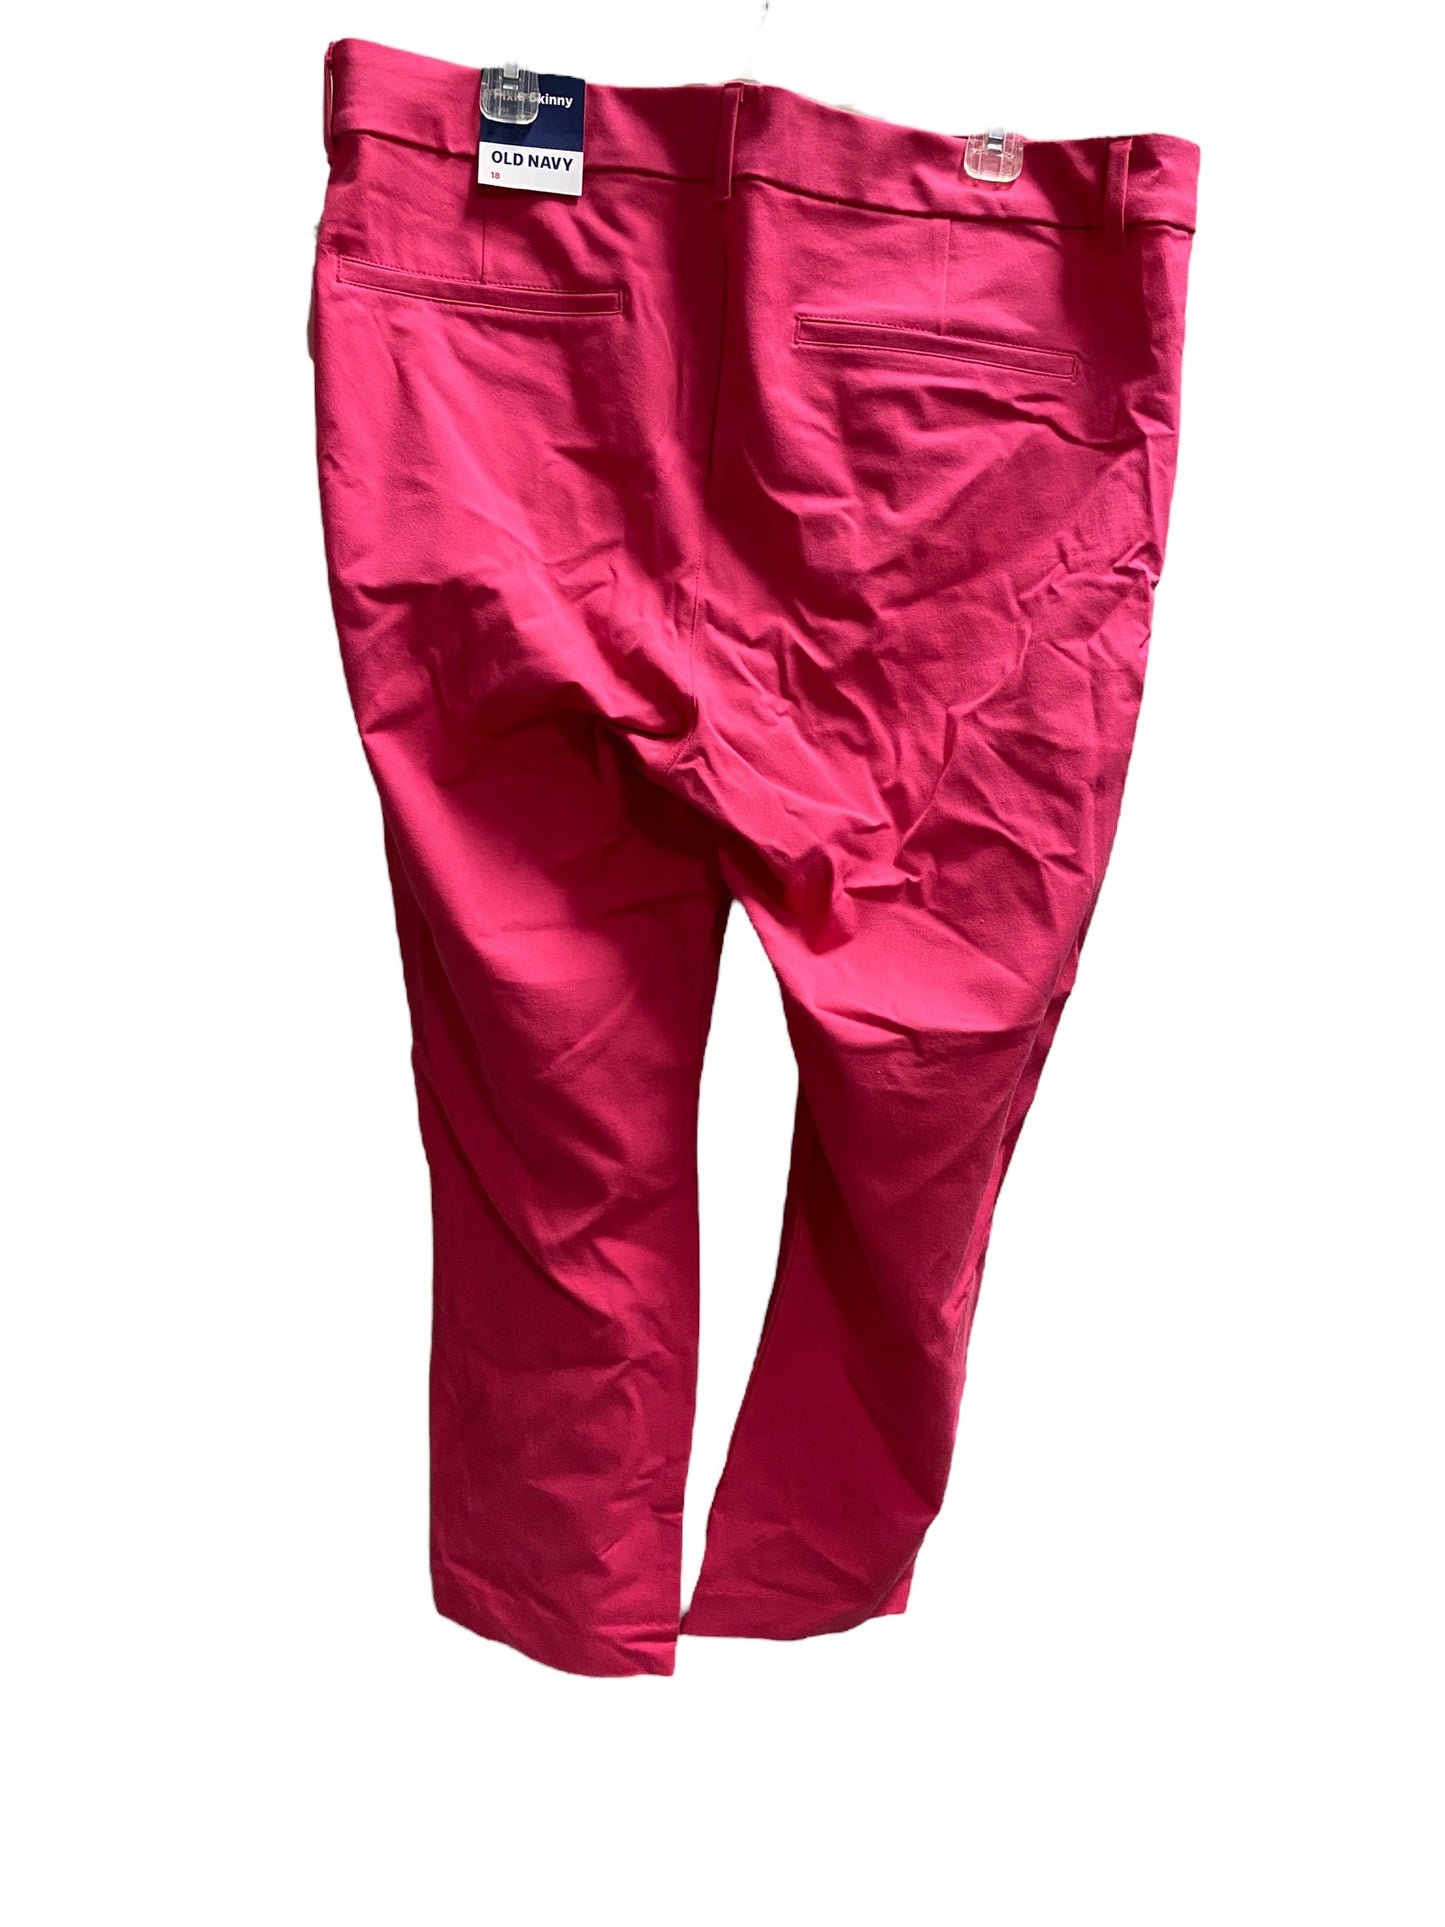 Pink Pants Cropped Old Navy, Size 18